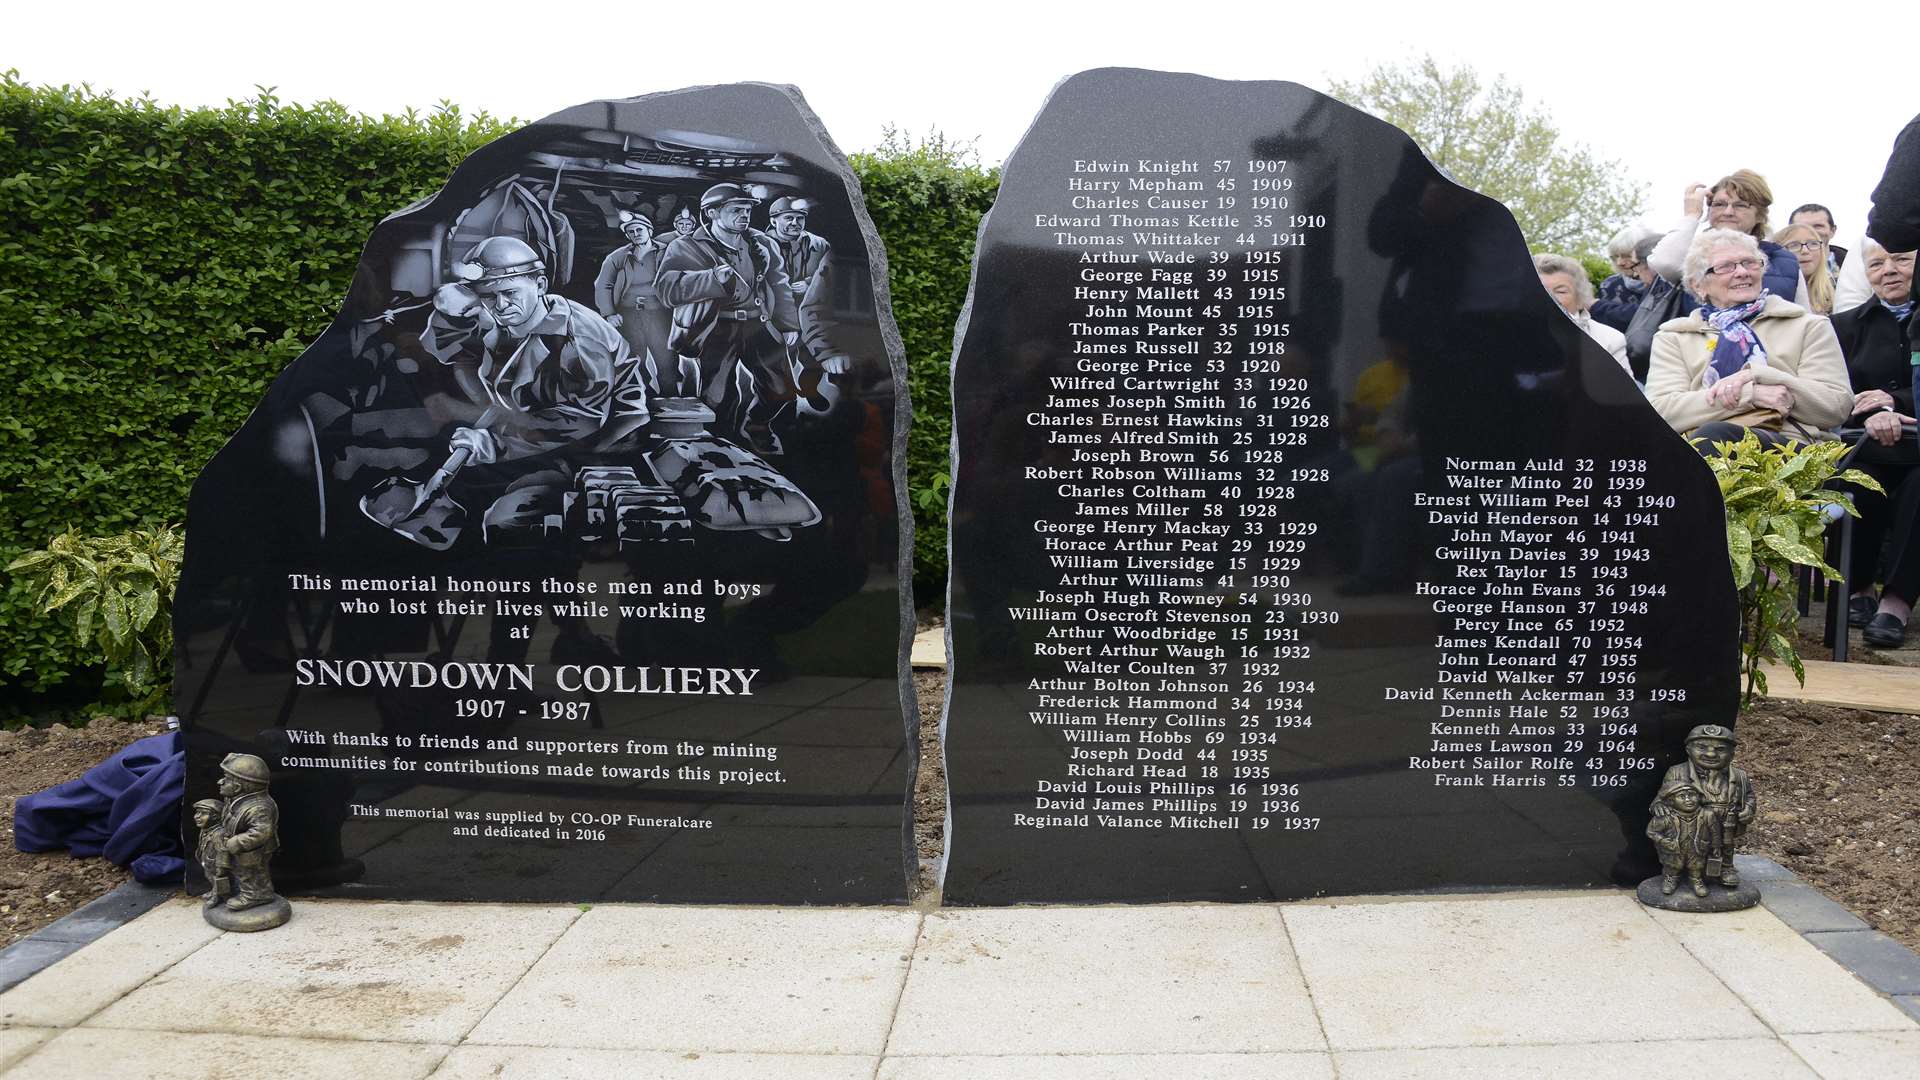 A new memorial stone to those who died due to accidents in Snowdown Colliery has been unveiled in Aylesham